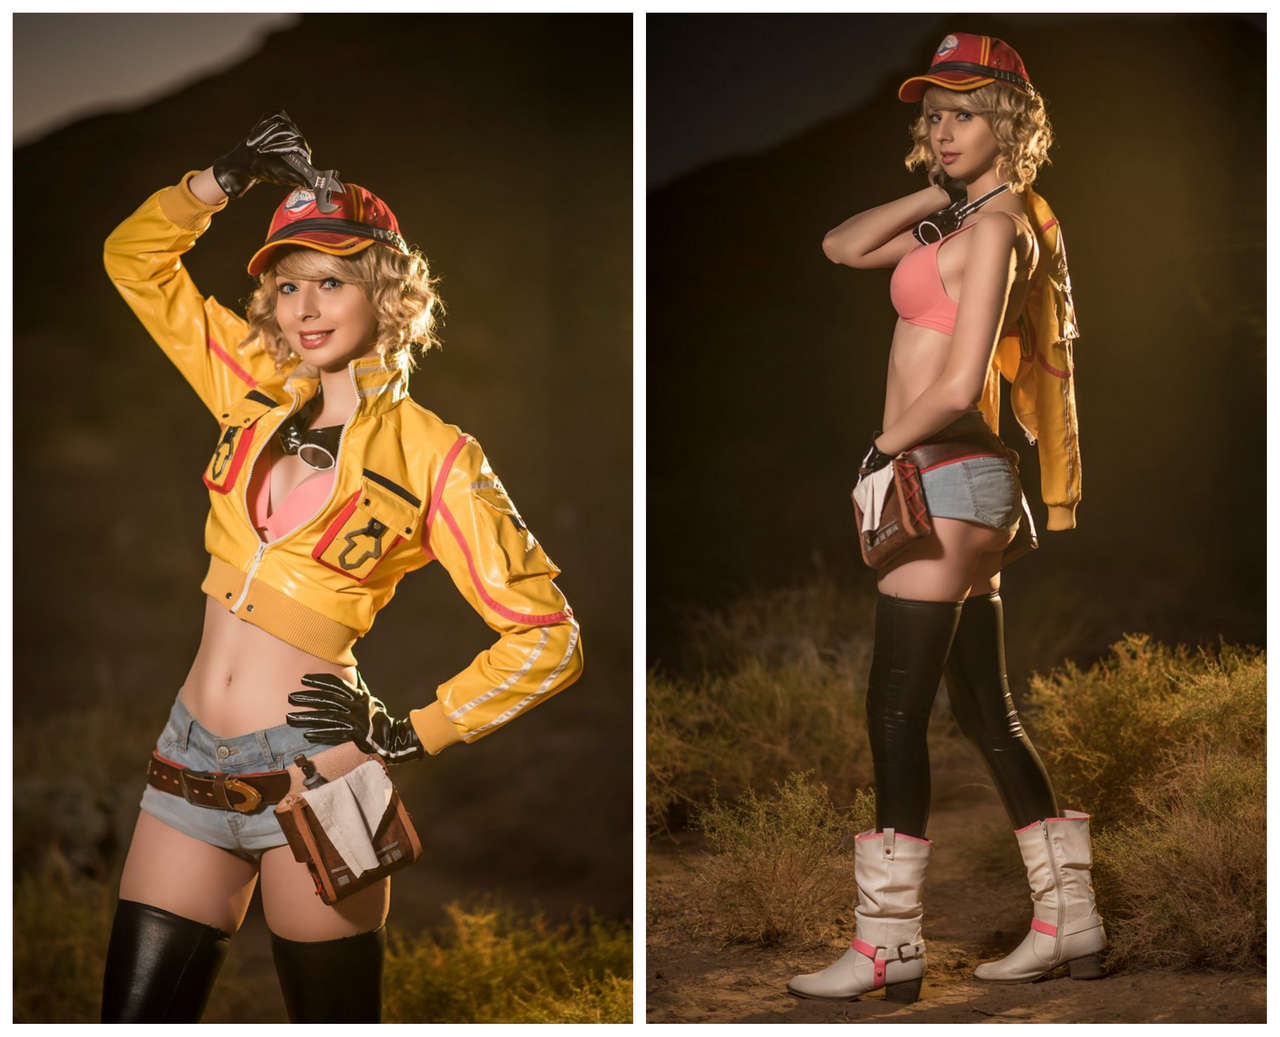 Some More Of Suzi Dressed As Cindy Ffx